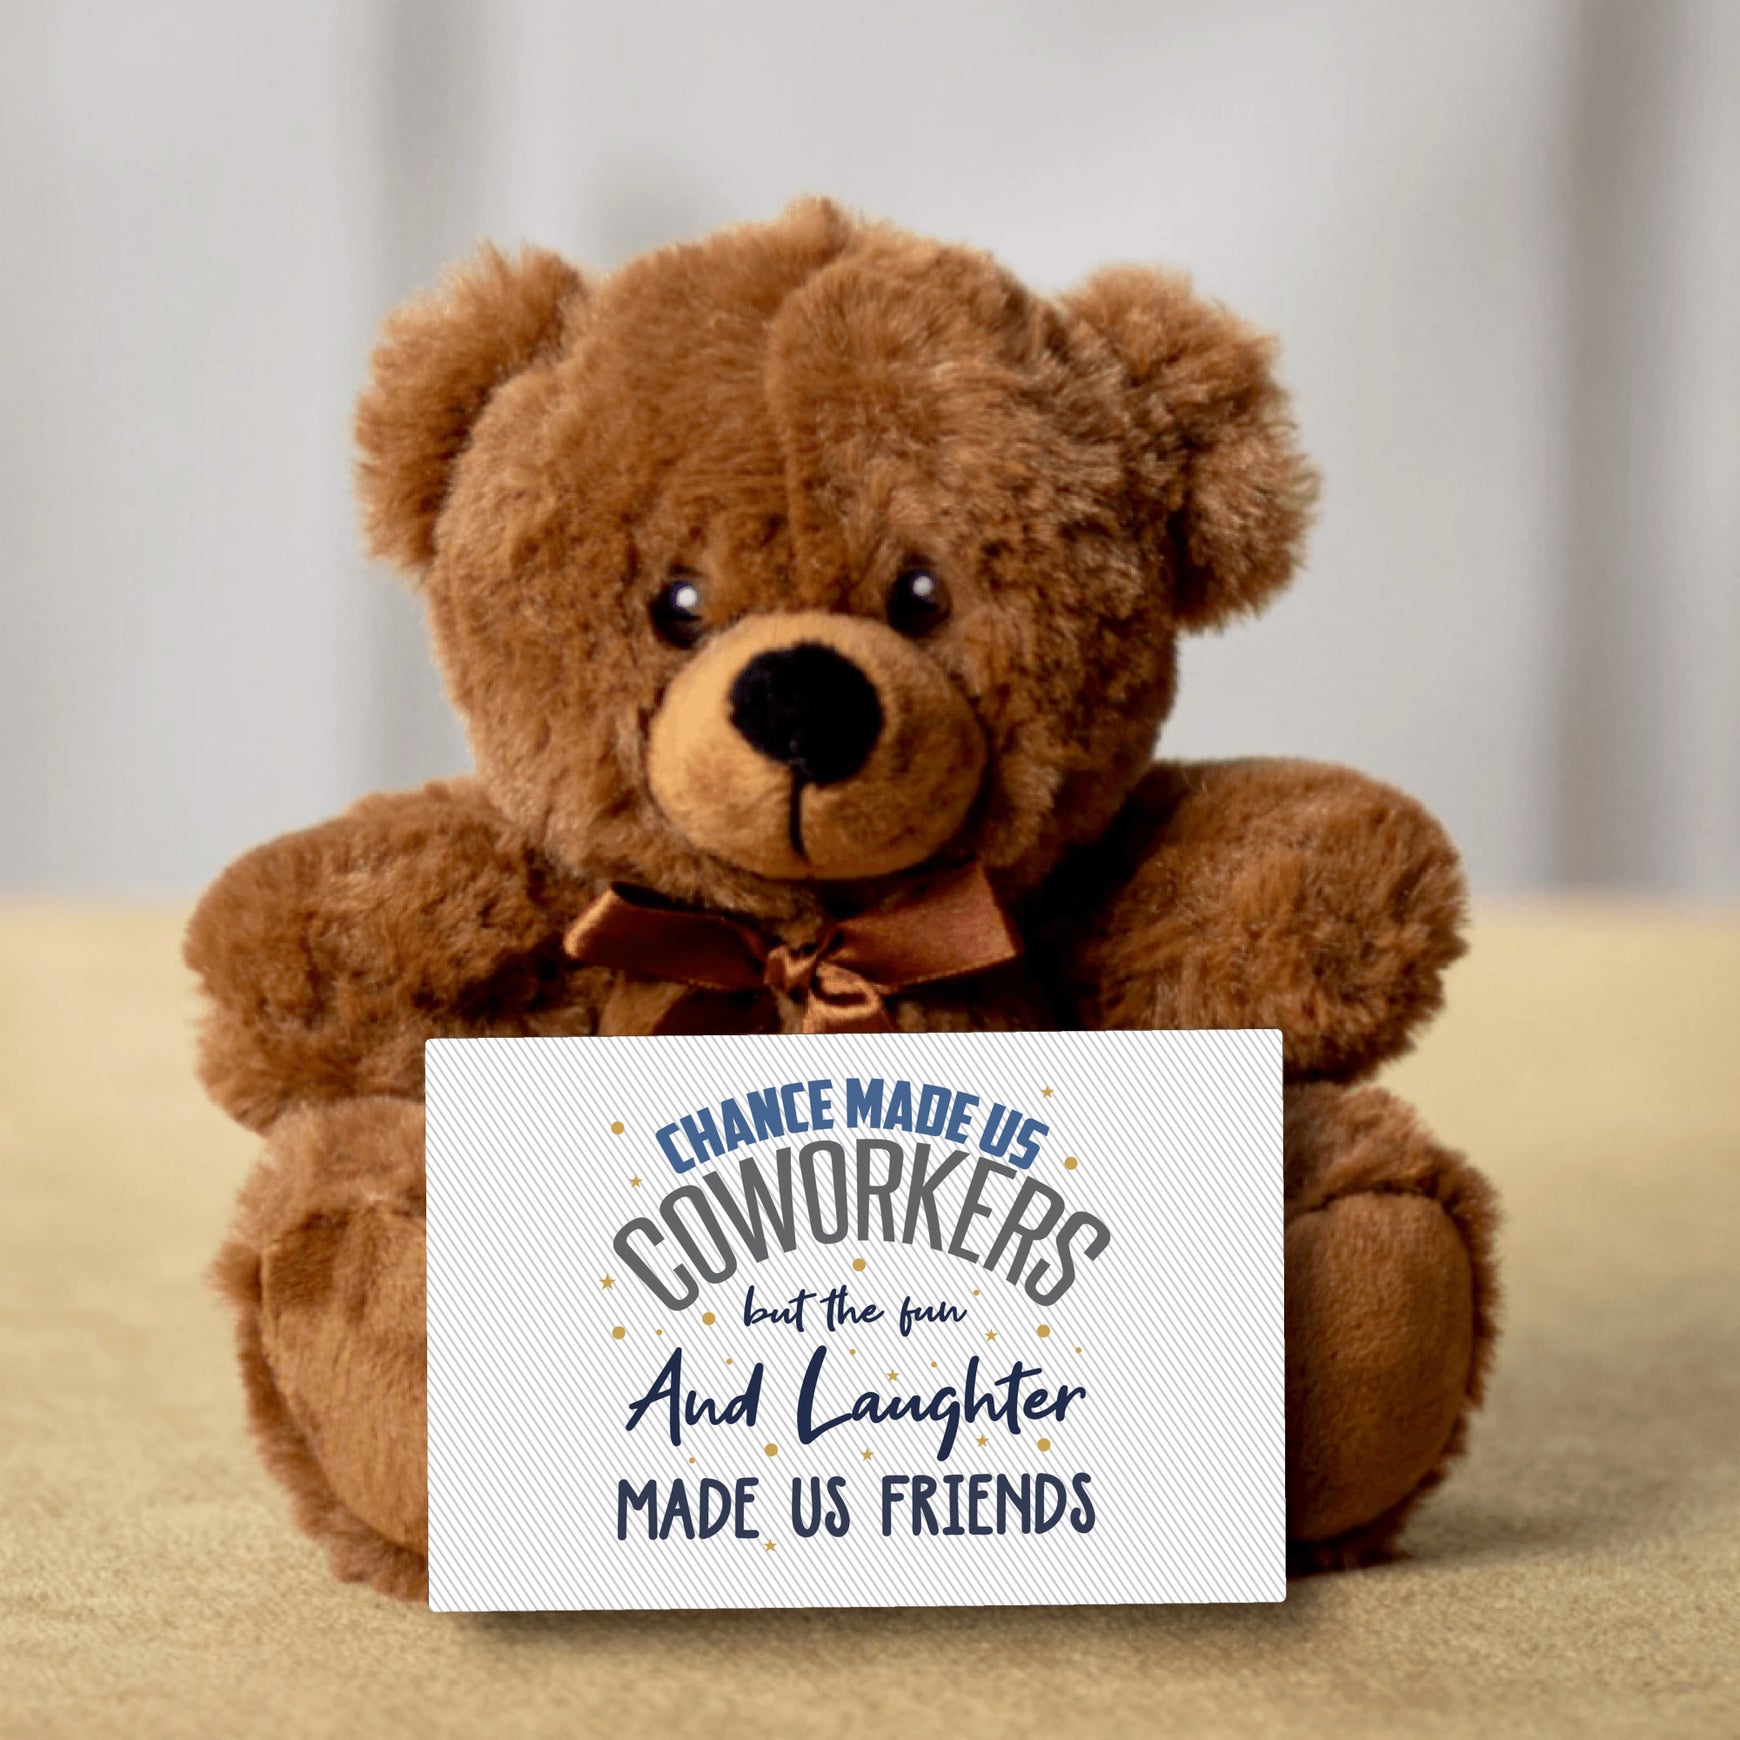 Chance Made Us Friends Teddy Bear With Postcard - PRICE INCLUDES FREE SHIPPING!!